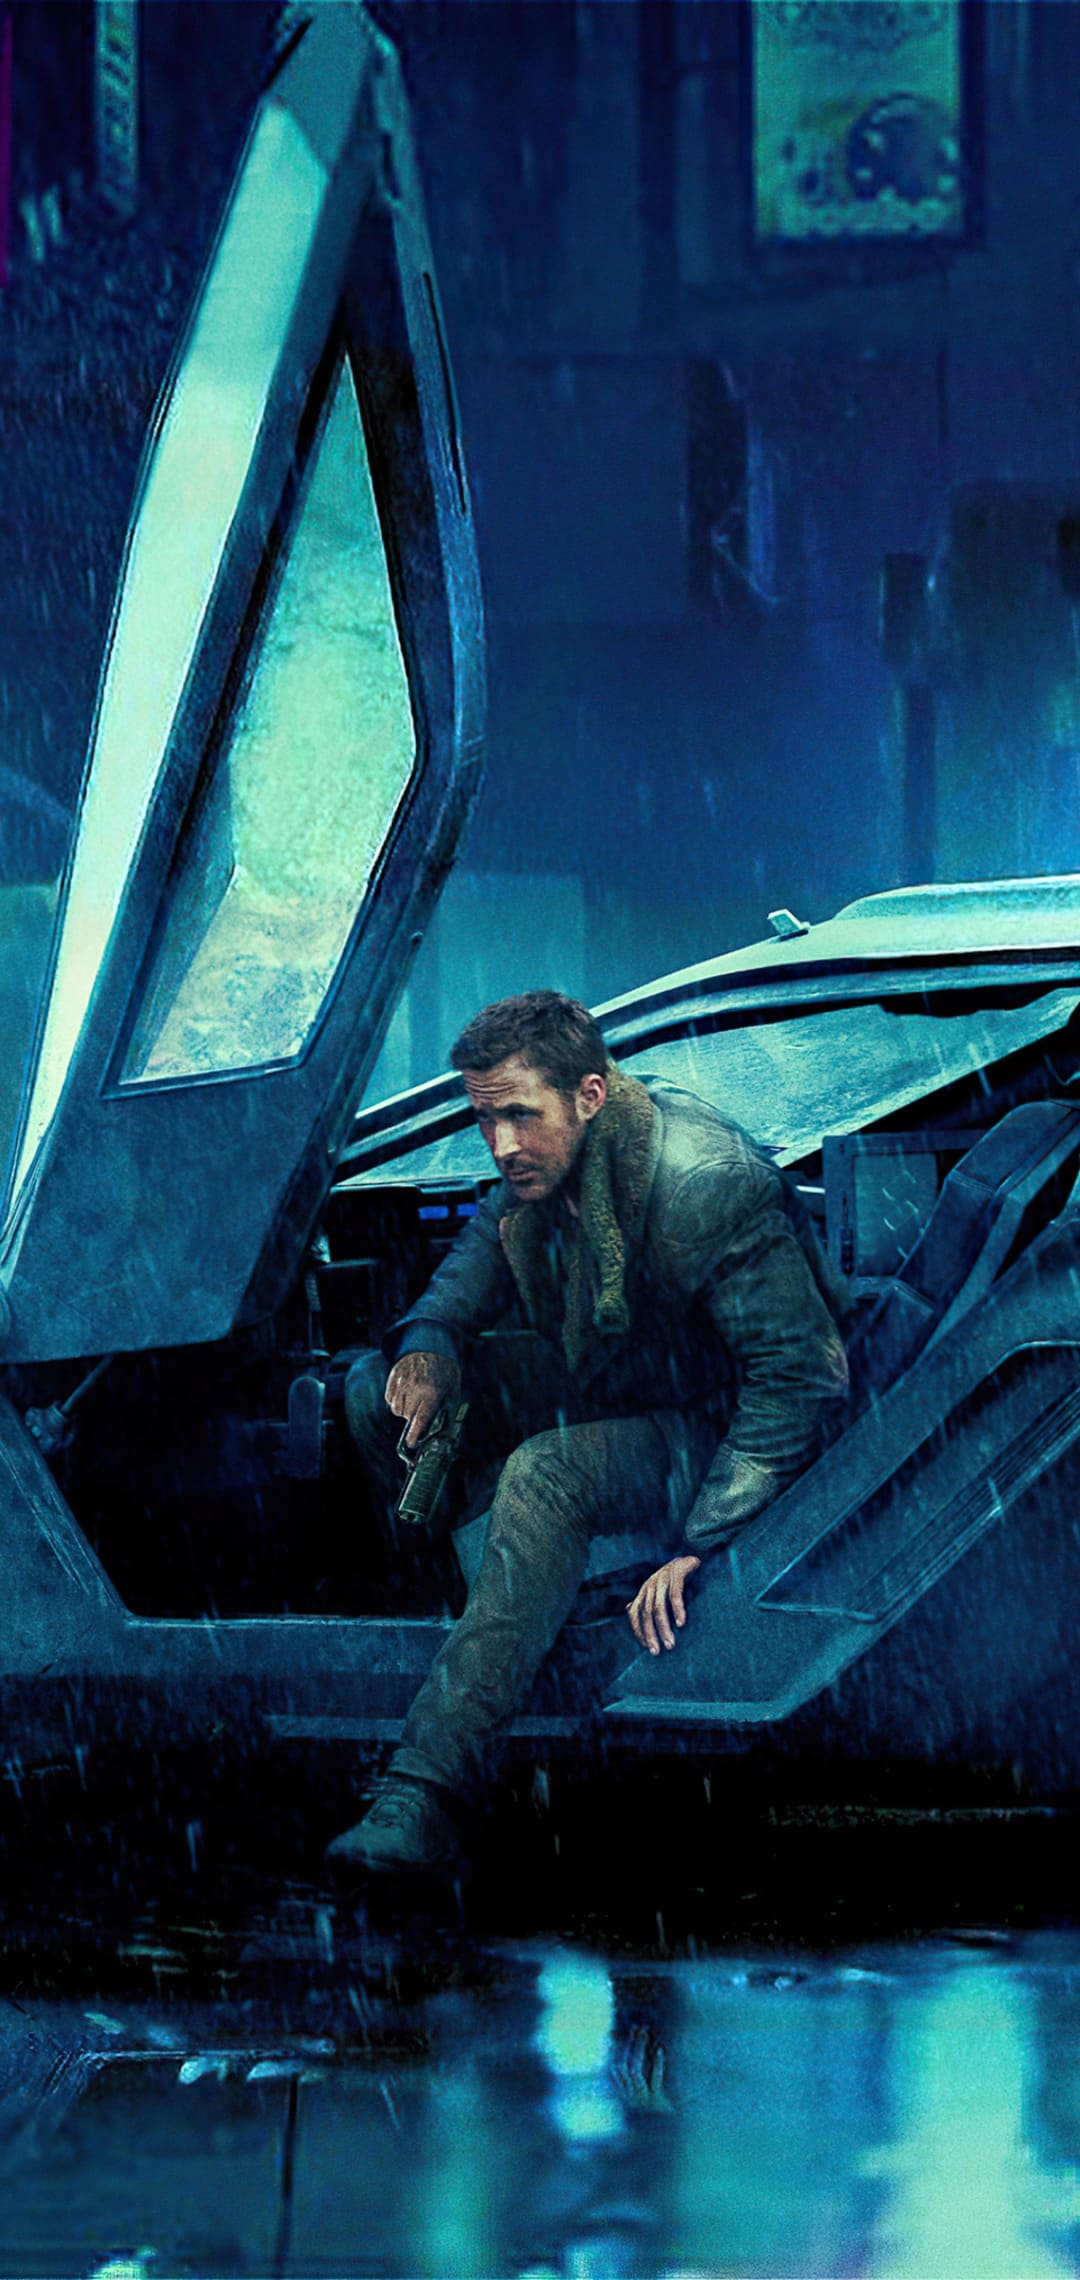 Best Blade Runner 2049 wallpapers, Download 4K HD, Futuristic theme, Memorable characters, 1080x2280 HD Handy